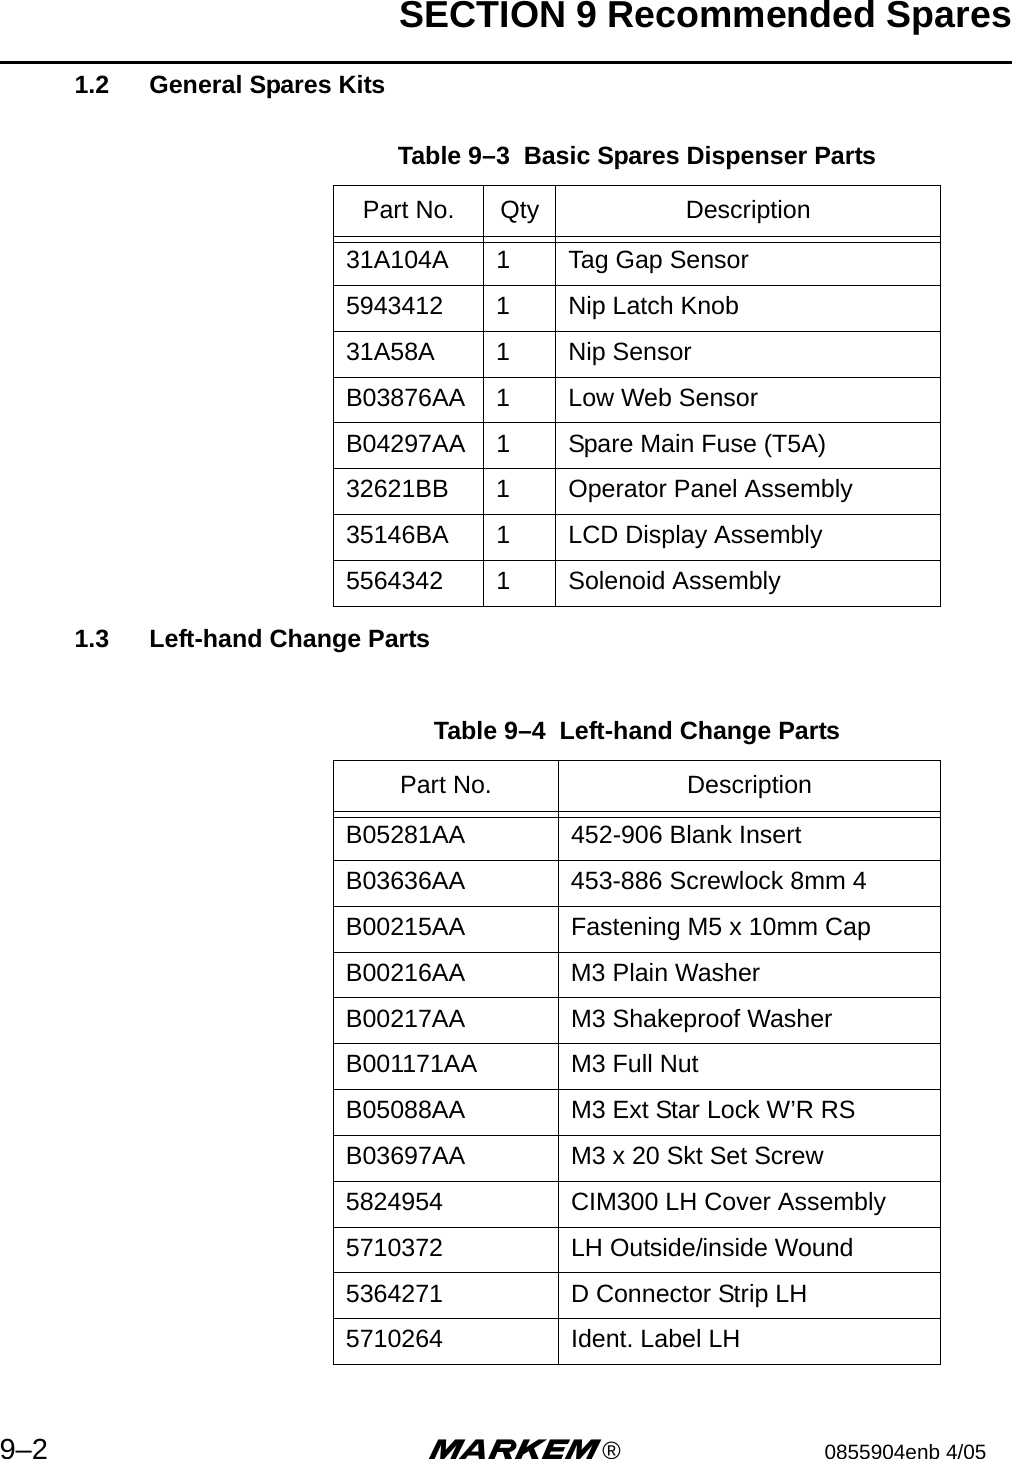 SECTION 9 Recommended Spares9–2 m®0855904enb 4/05 1.2 General Spares Kits1.3 Left-hand Change PartsTable 9–3  Basic Spares Dispenser PartsPart No. Qty Description31A104A 1 Tag Gap Sensor5943412 1 Nip Latch Knob31A58A 1 Nip SensorB03876AA 1 Low Web SensorB04297AA 1 Spare Main Fuse (T5A)32621BB 1 Operator Panel Assembly35146BA 1 LCD Display Assembly5564342 1 Solenoid AssemblyTable 9–4  Left-hand Change PartsPart No. DescriptionB05281AA 452-906 Blank InsertB03636AA 453-886 Screwlock 8mm 4B00215AA Fastening M5 x 10mm CapB00216AA M3 Plain WasherB00217AA M3 Shakeproof WasherB001171AA M3 Full NutB05088AA M3 Ext Star Lock W’R RSB03697AA M3 x 20 Skt Set Screw5824954 CIM300 LH Cover Assembly5710372 LH Outside/inside Wound5364271 D Connector Strip LH5710264 Ident. Label LH